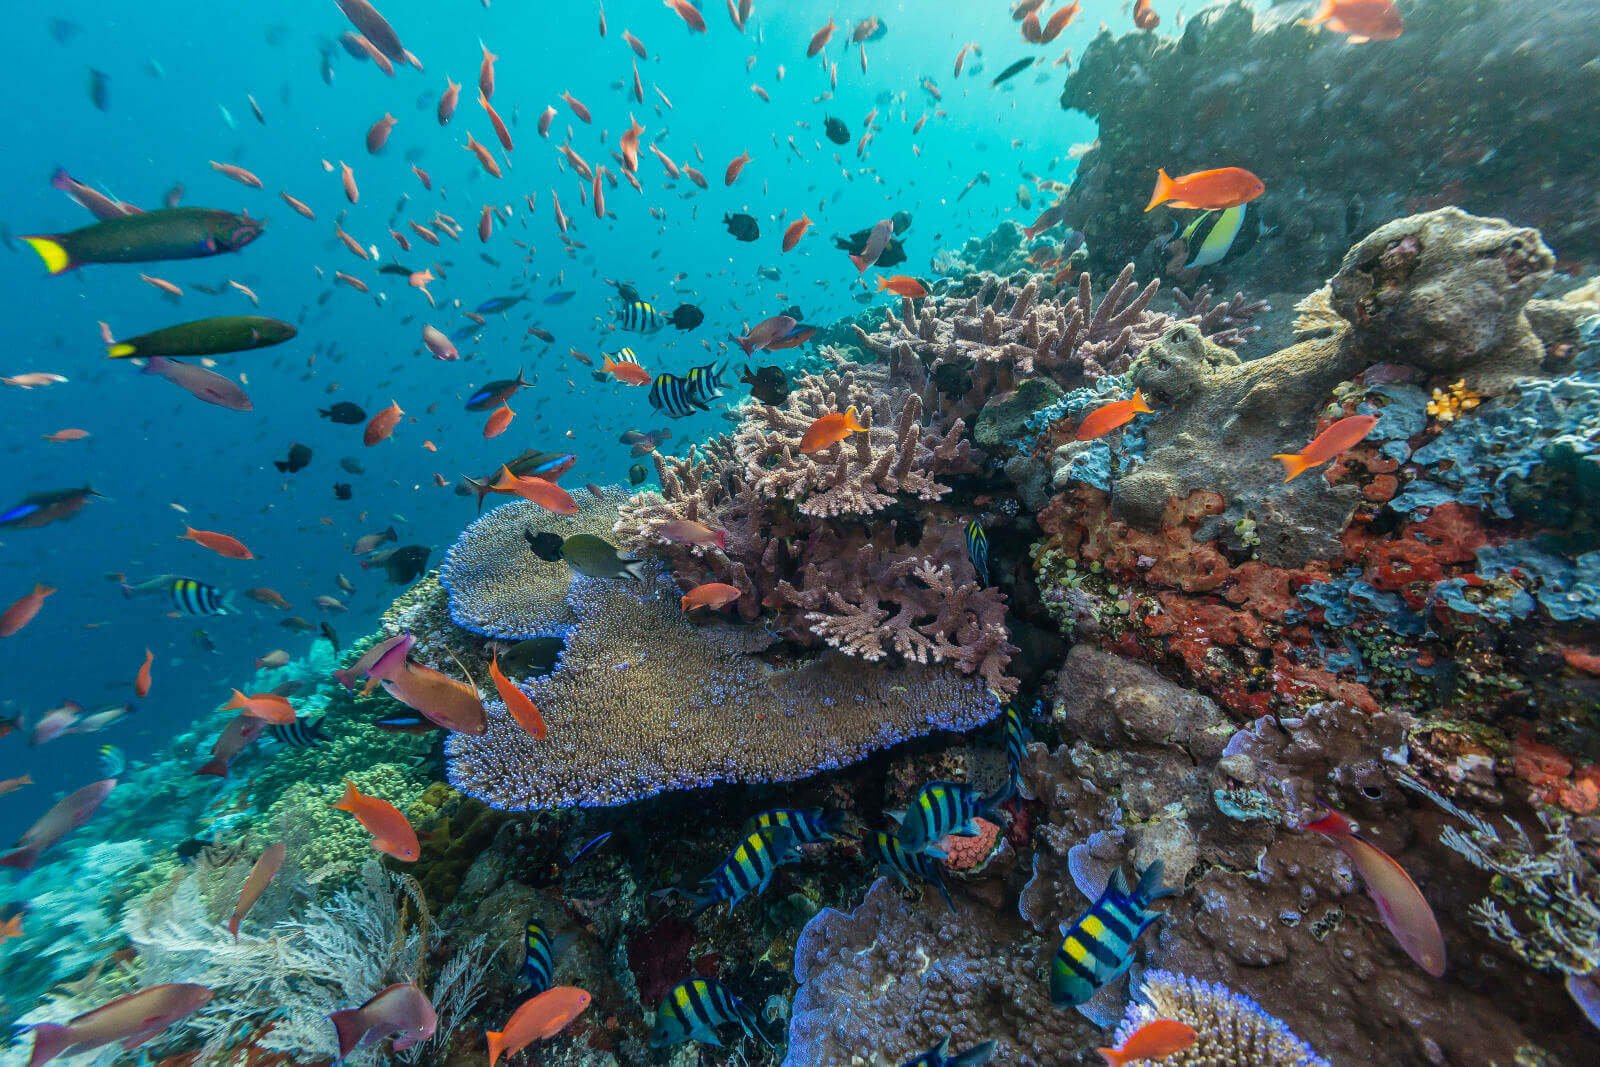 Bowl Komodo Np Underwater Scenic of Fish and Coral Toggle Switch 3dRose lsp_188451_1 Indonesia 